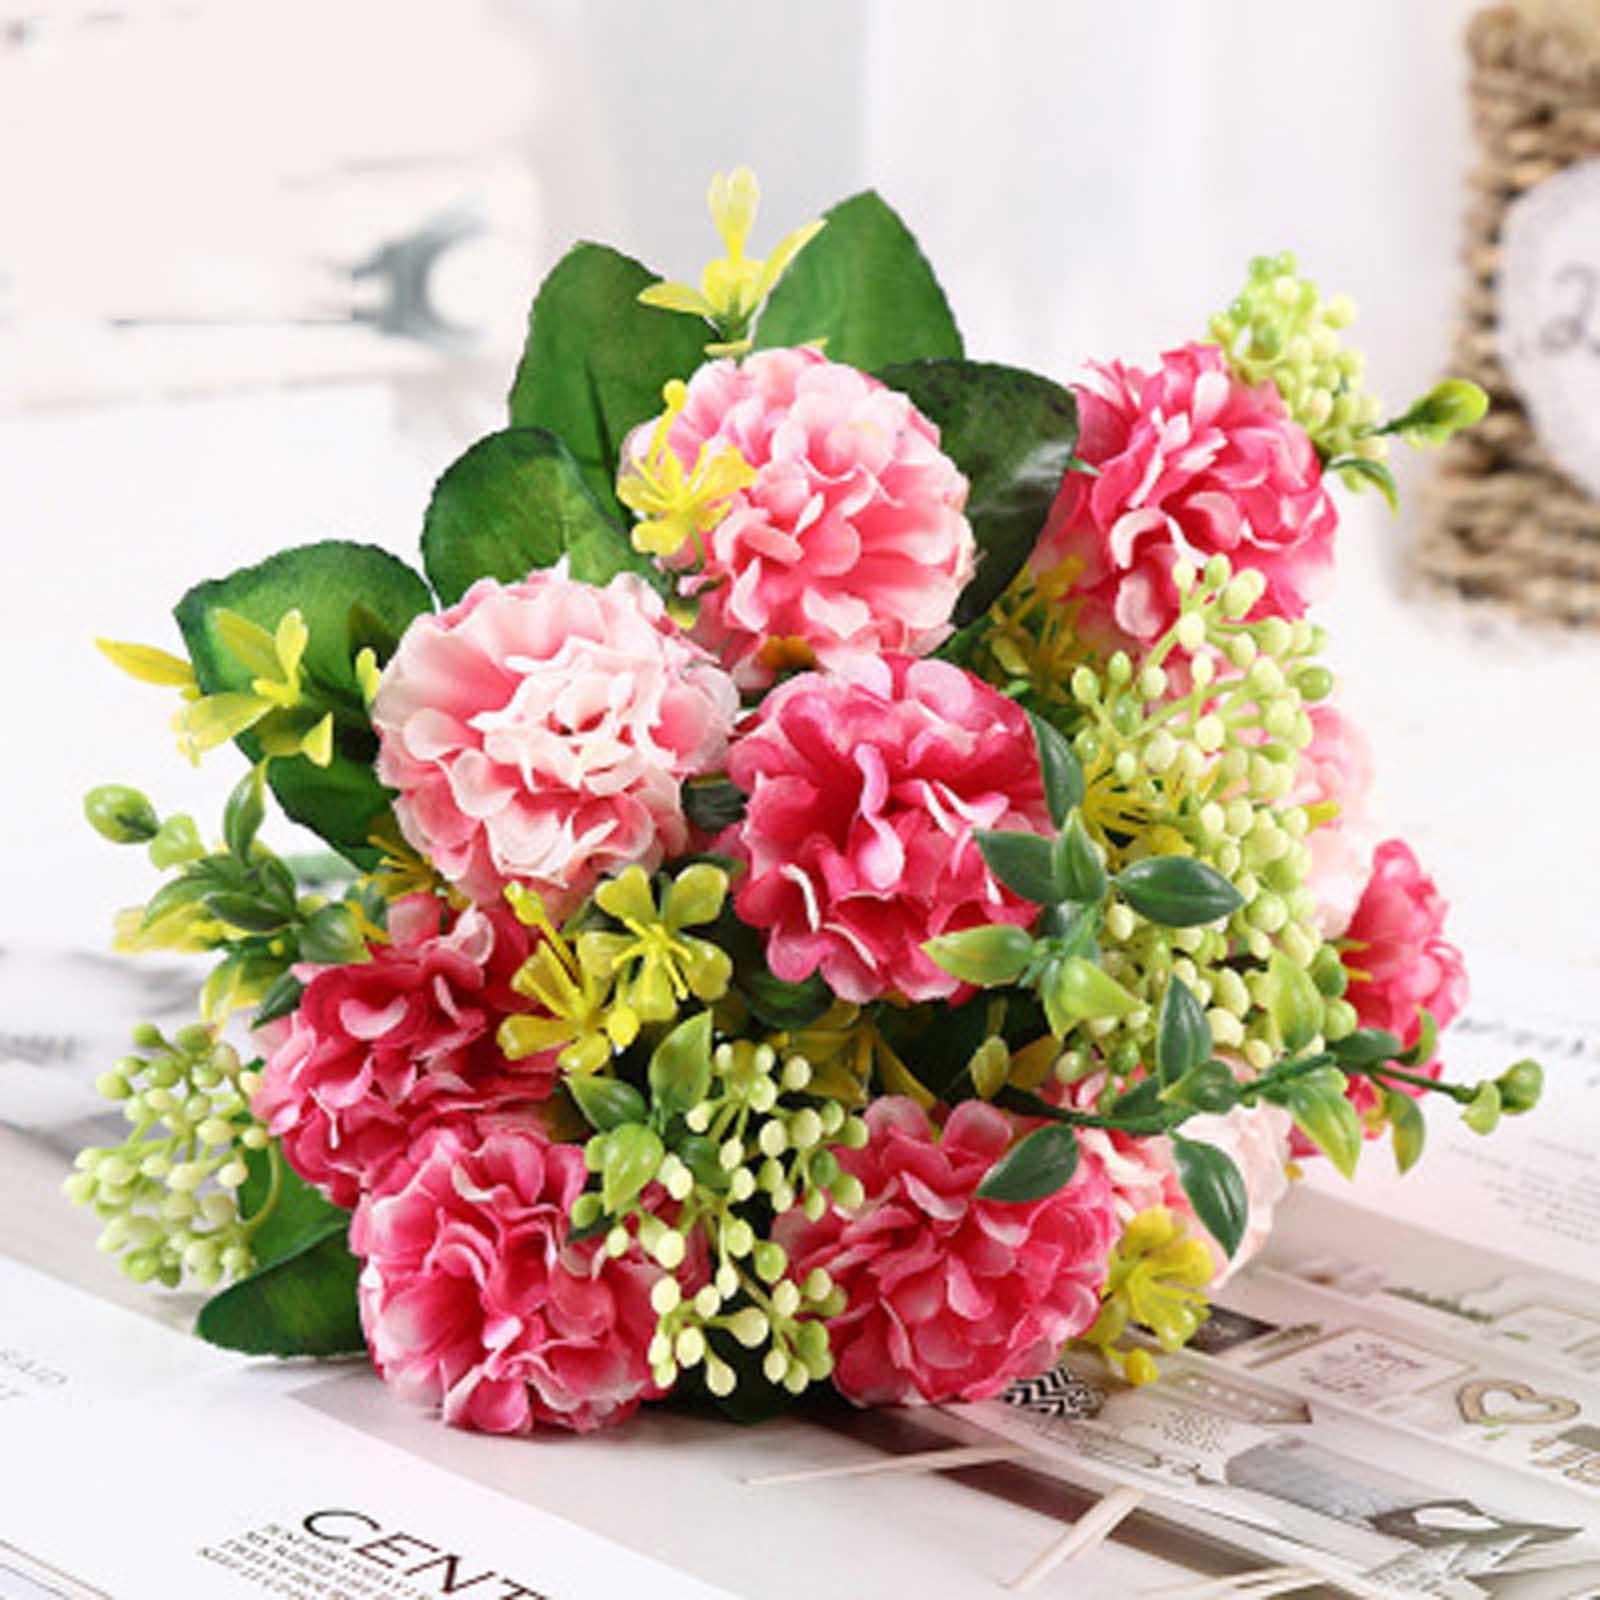 WQQZJJ Home Decor 2PC Fake Flowers Vintage Artificial Silk Flowers Wedding  Home Decoration Gifts For Women On Clearance 